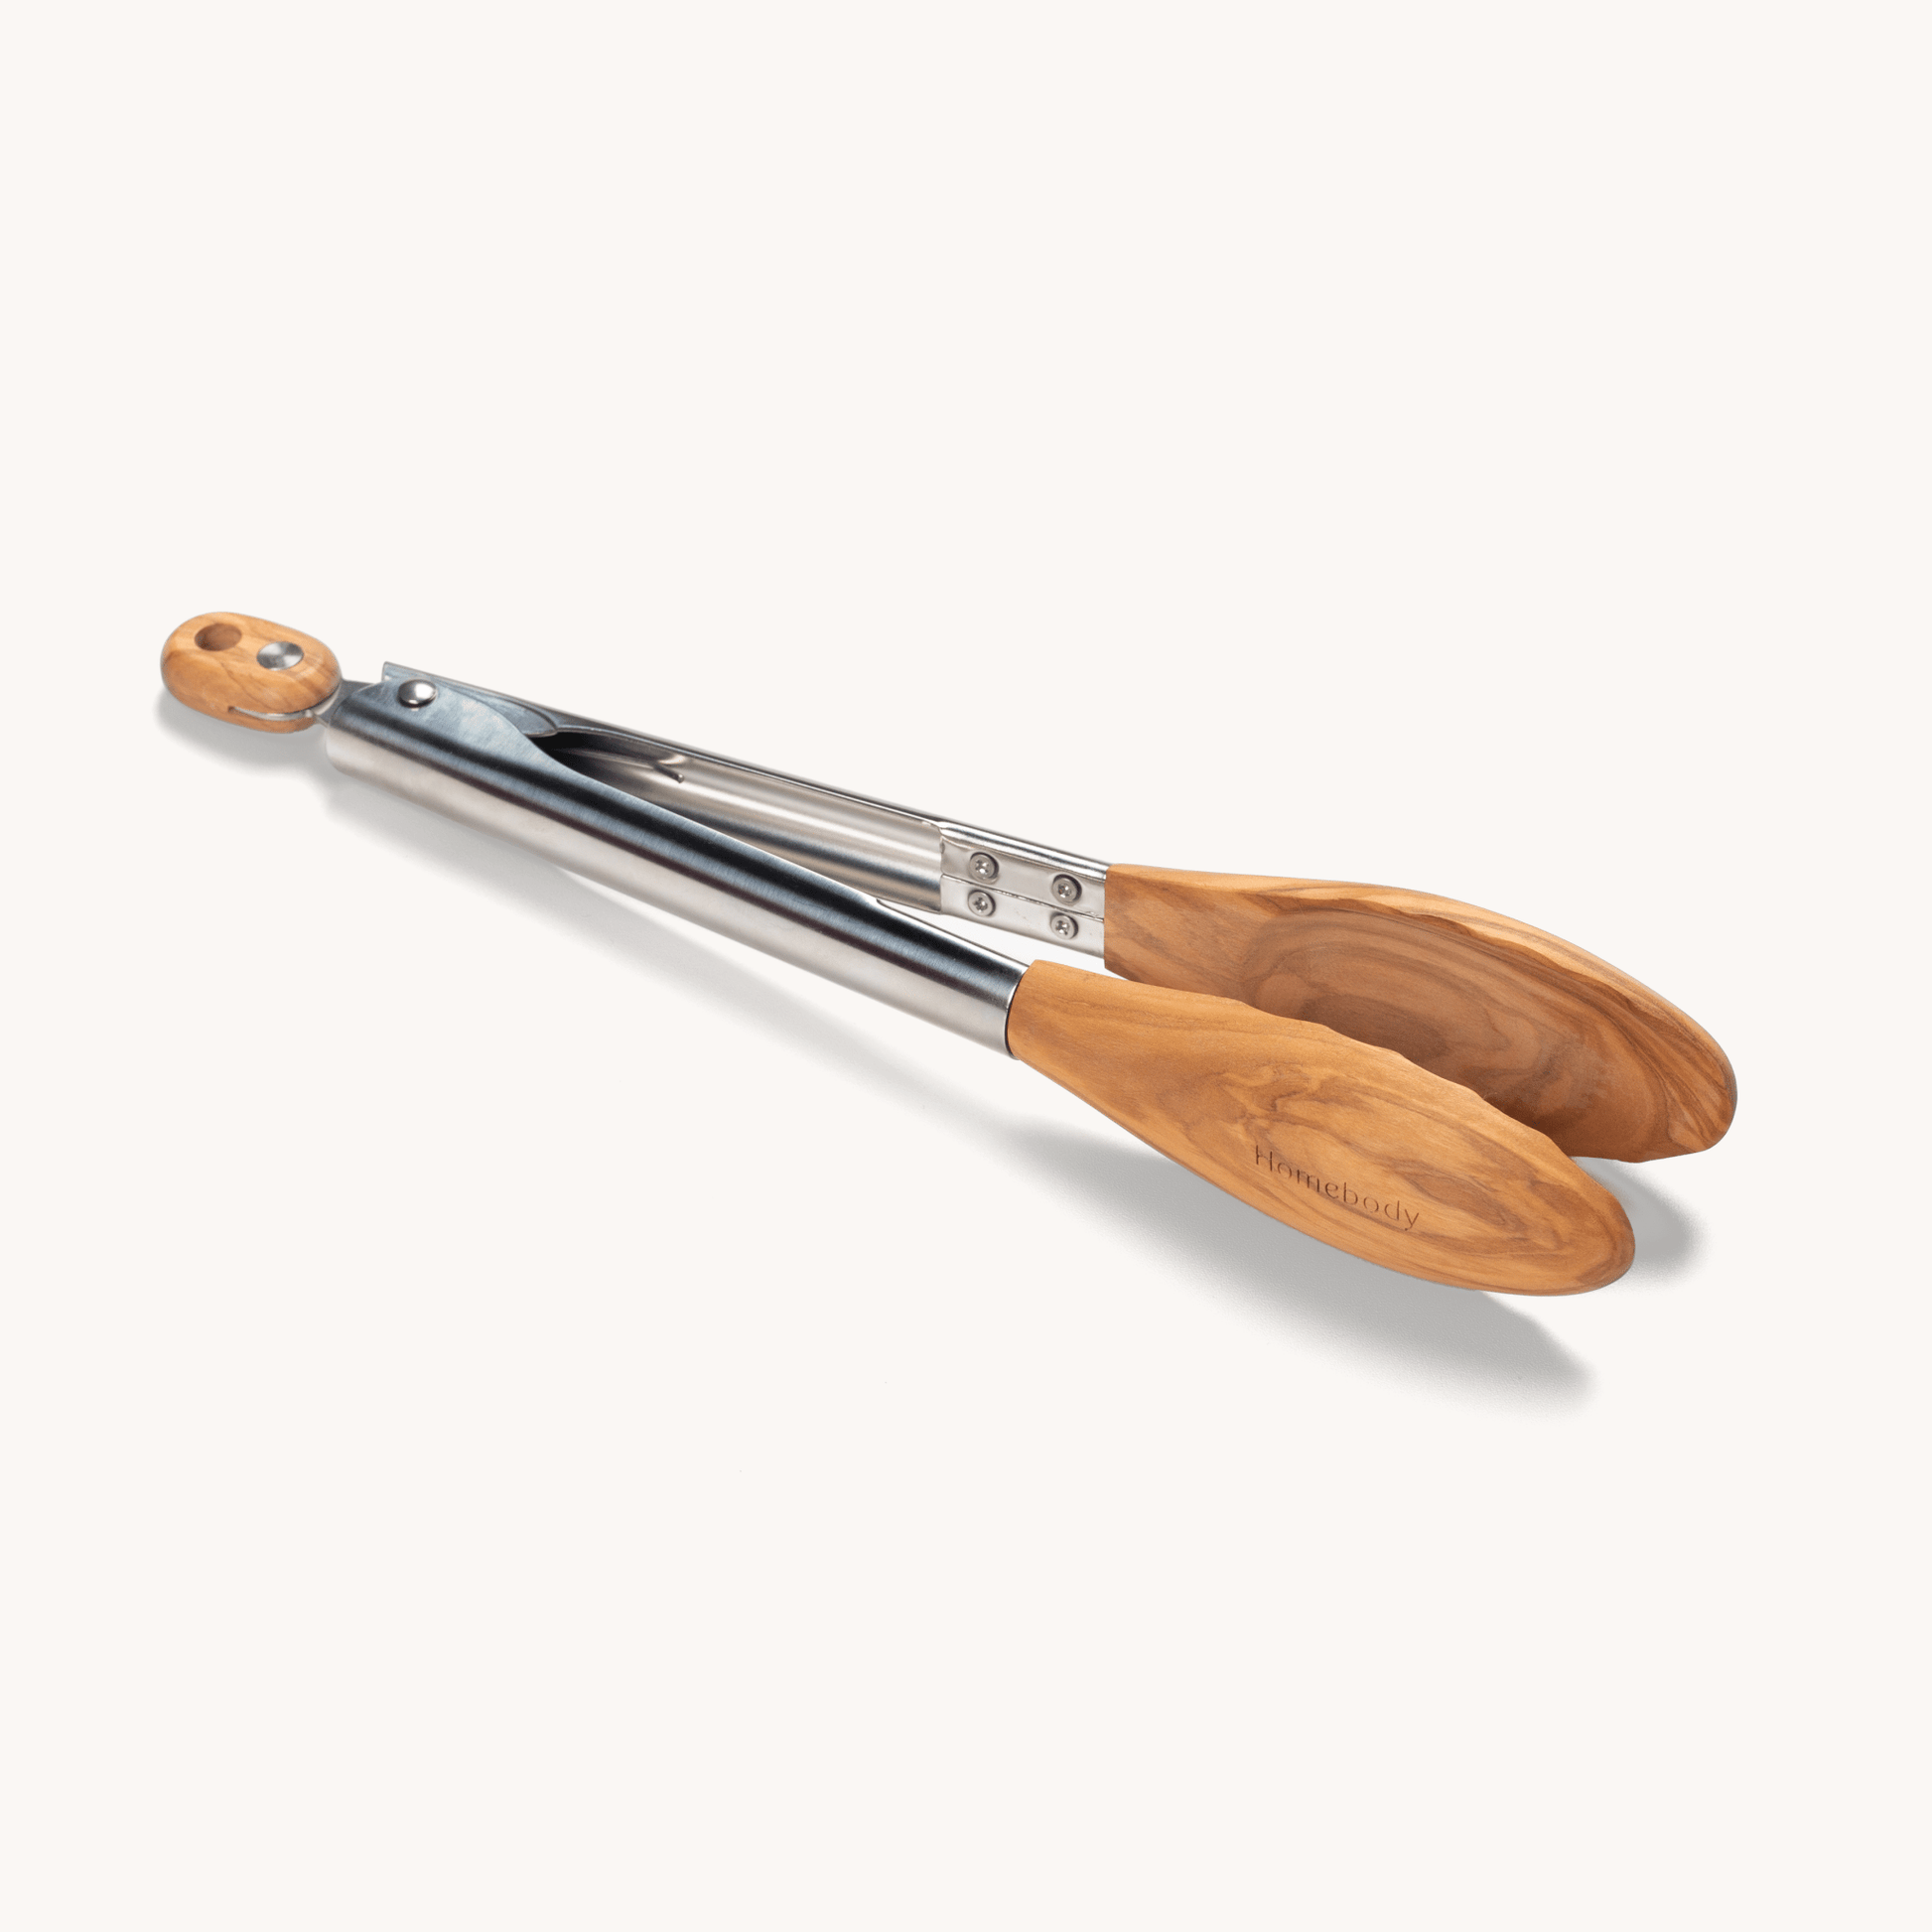 Olivewood and Steel Tongs - Homebody | Ceramic Non-stick cookware | No PFOA, PTFE